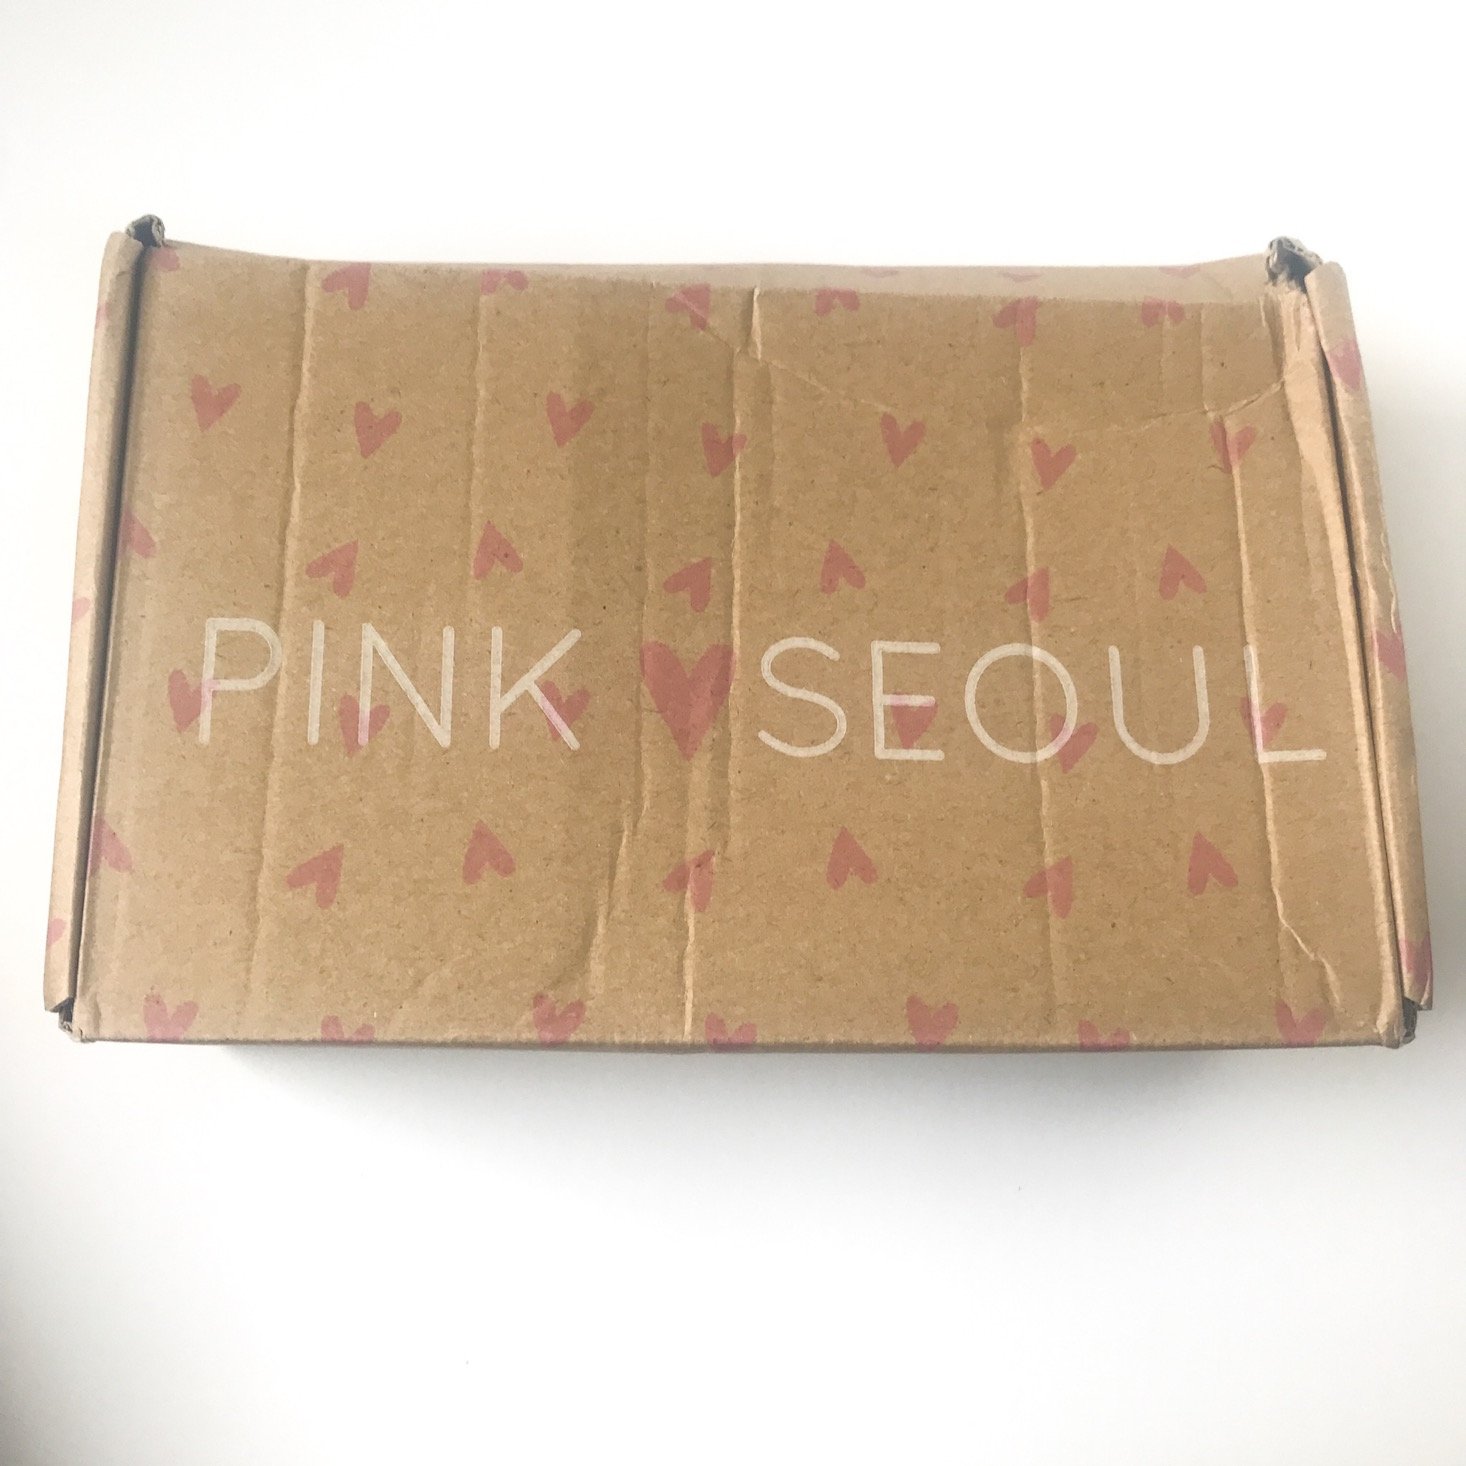 PinkSeoul K-Beauty Box Review + Coupon – February 2019